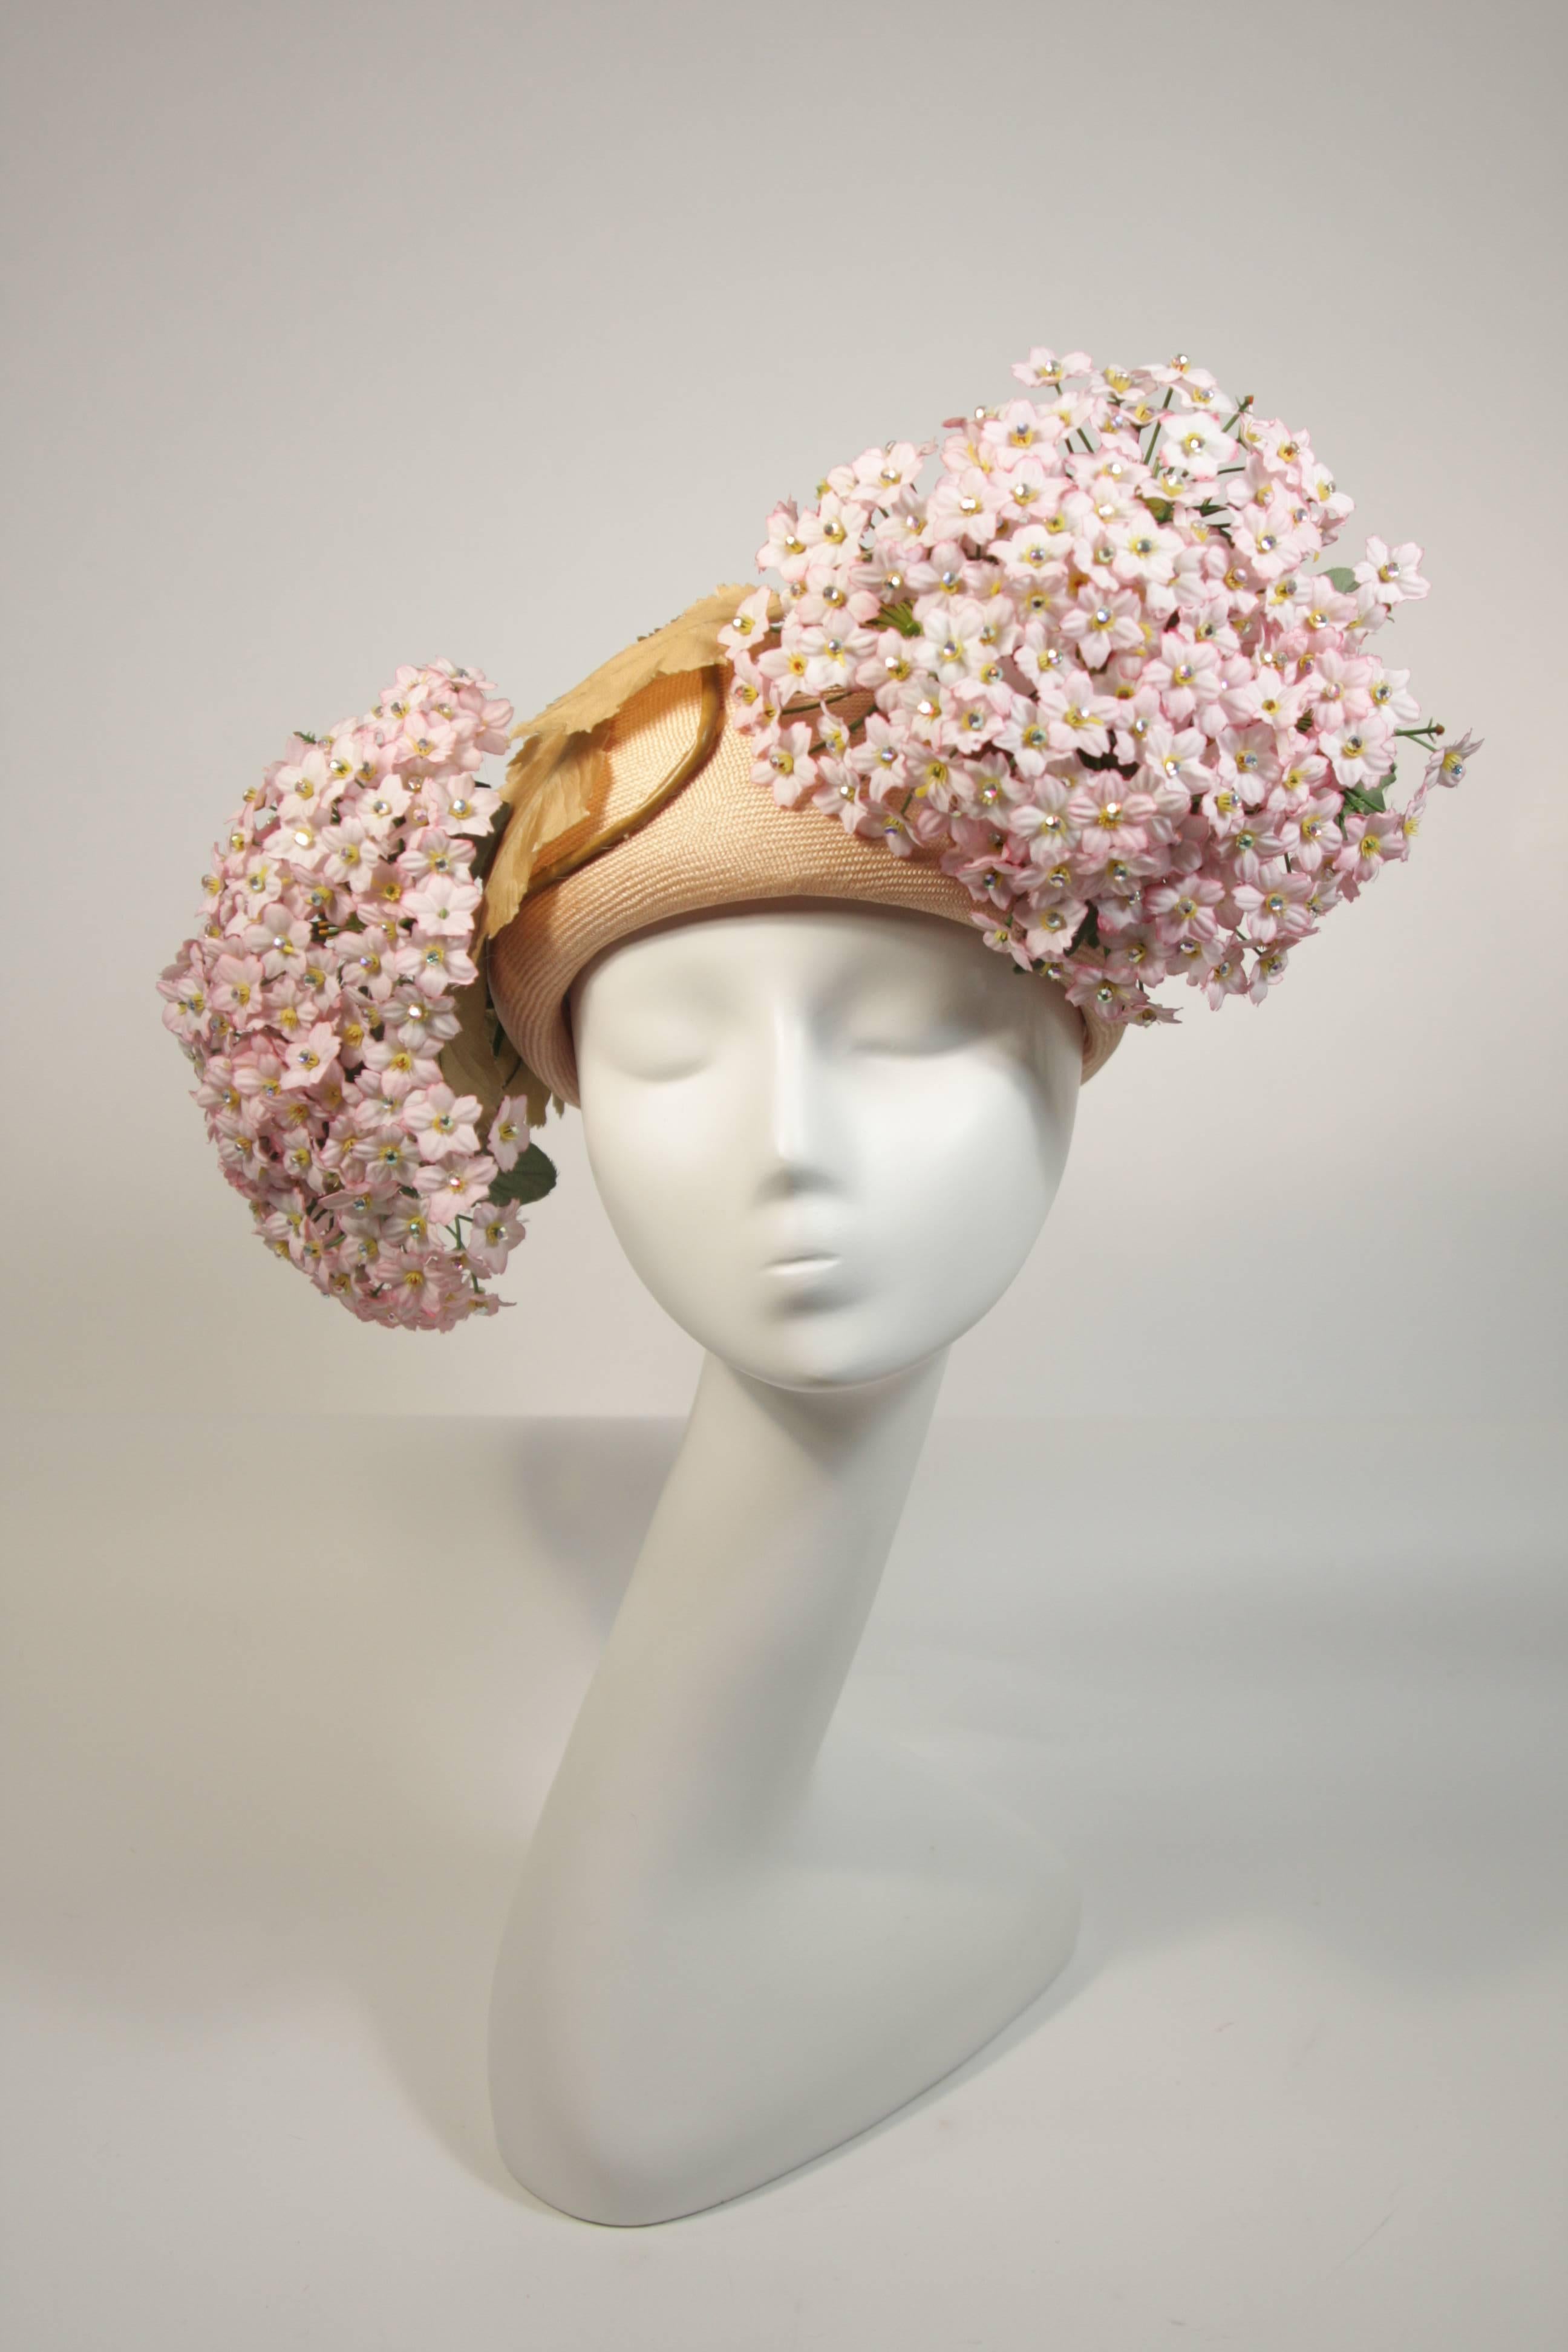 This Jack McConnell hat features a neutral base and two pink flower bouquets adorned with rhinestones. This is an absolutely stellar hat in excellent condition with original tags. Such an amazing design. Made in USA.

**Please cross-reference